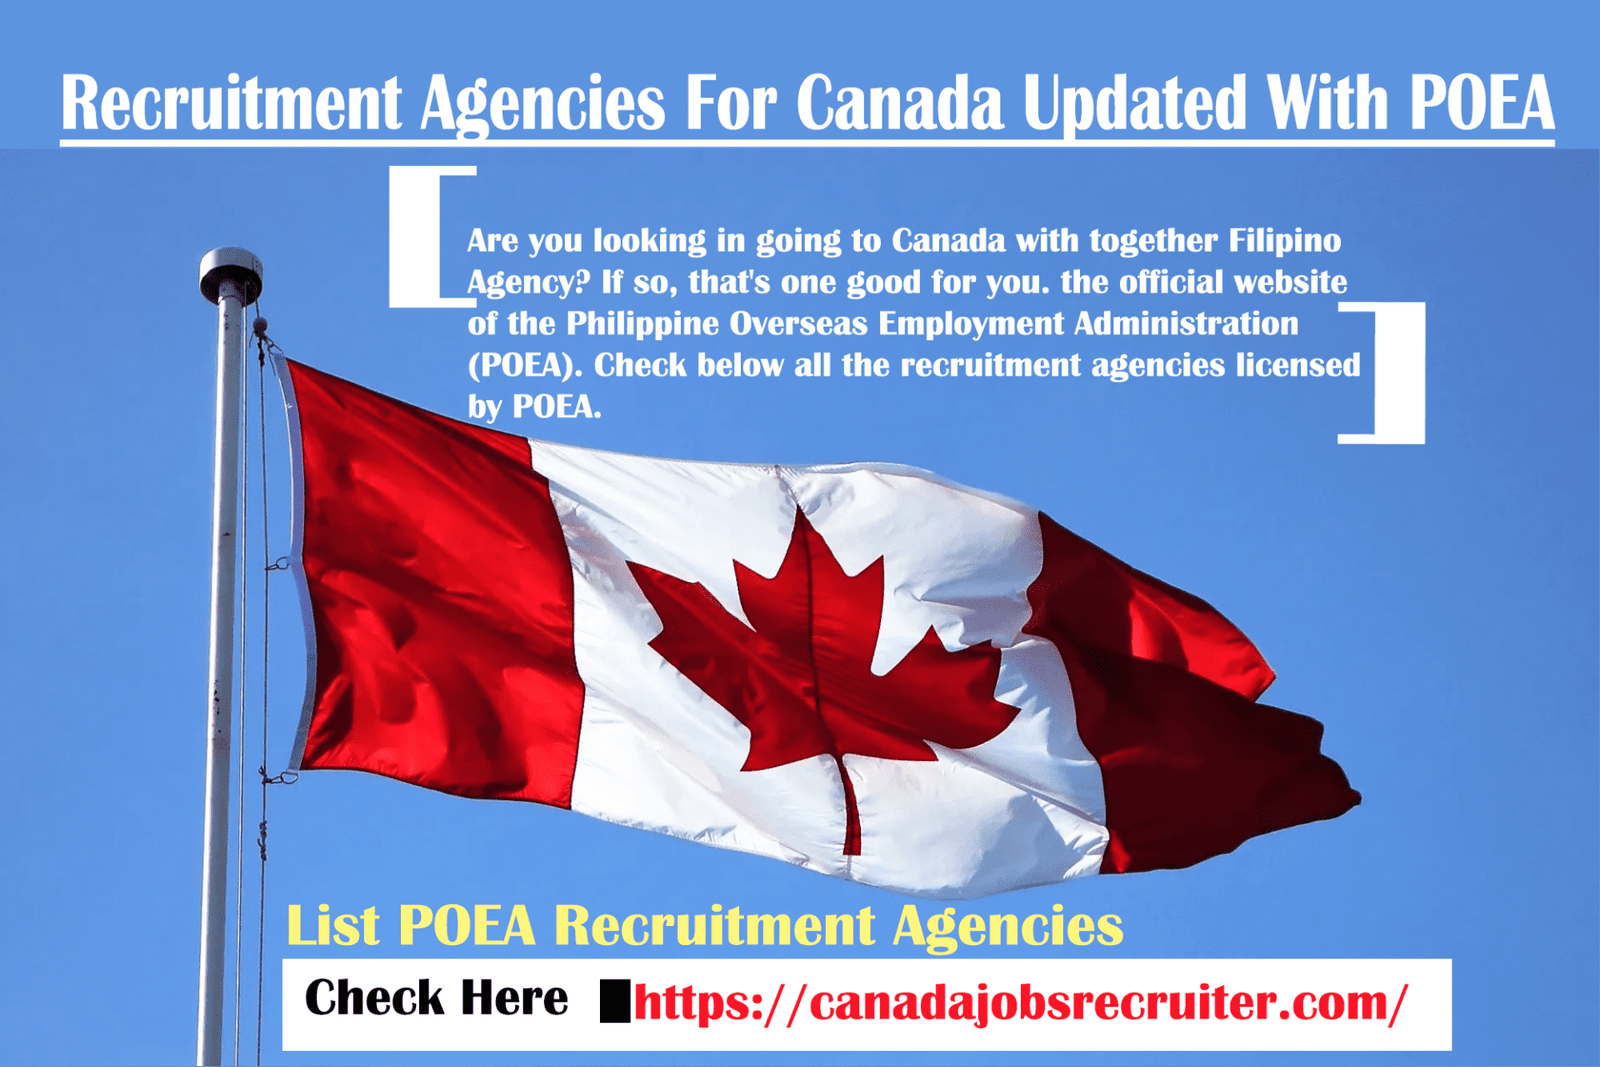 Recruitment agencies for Canada updated With POEA